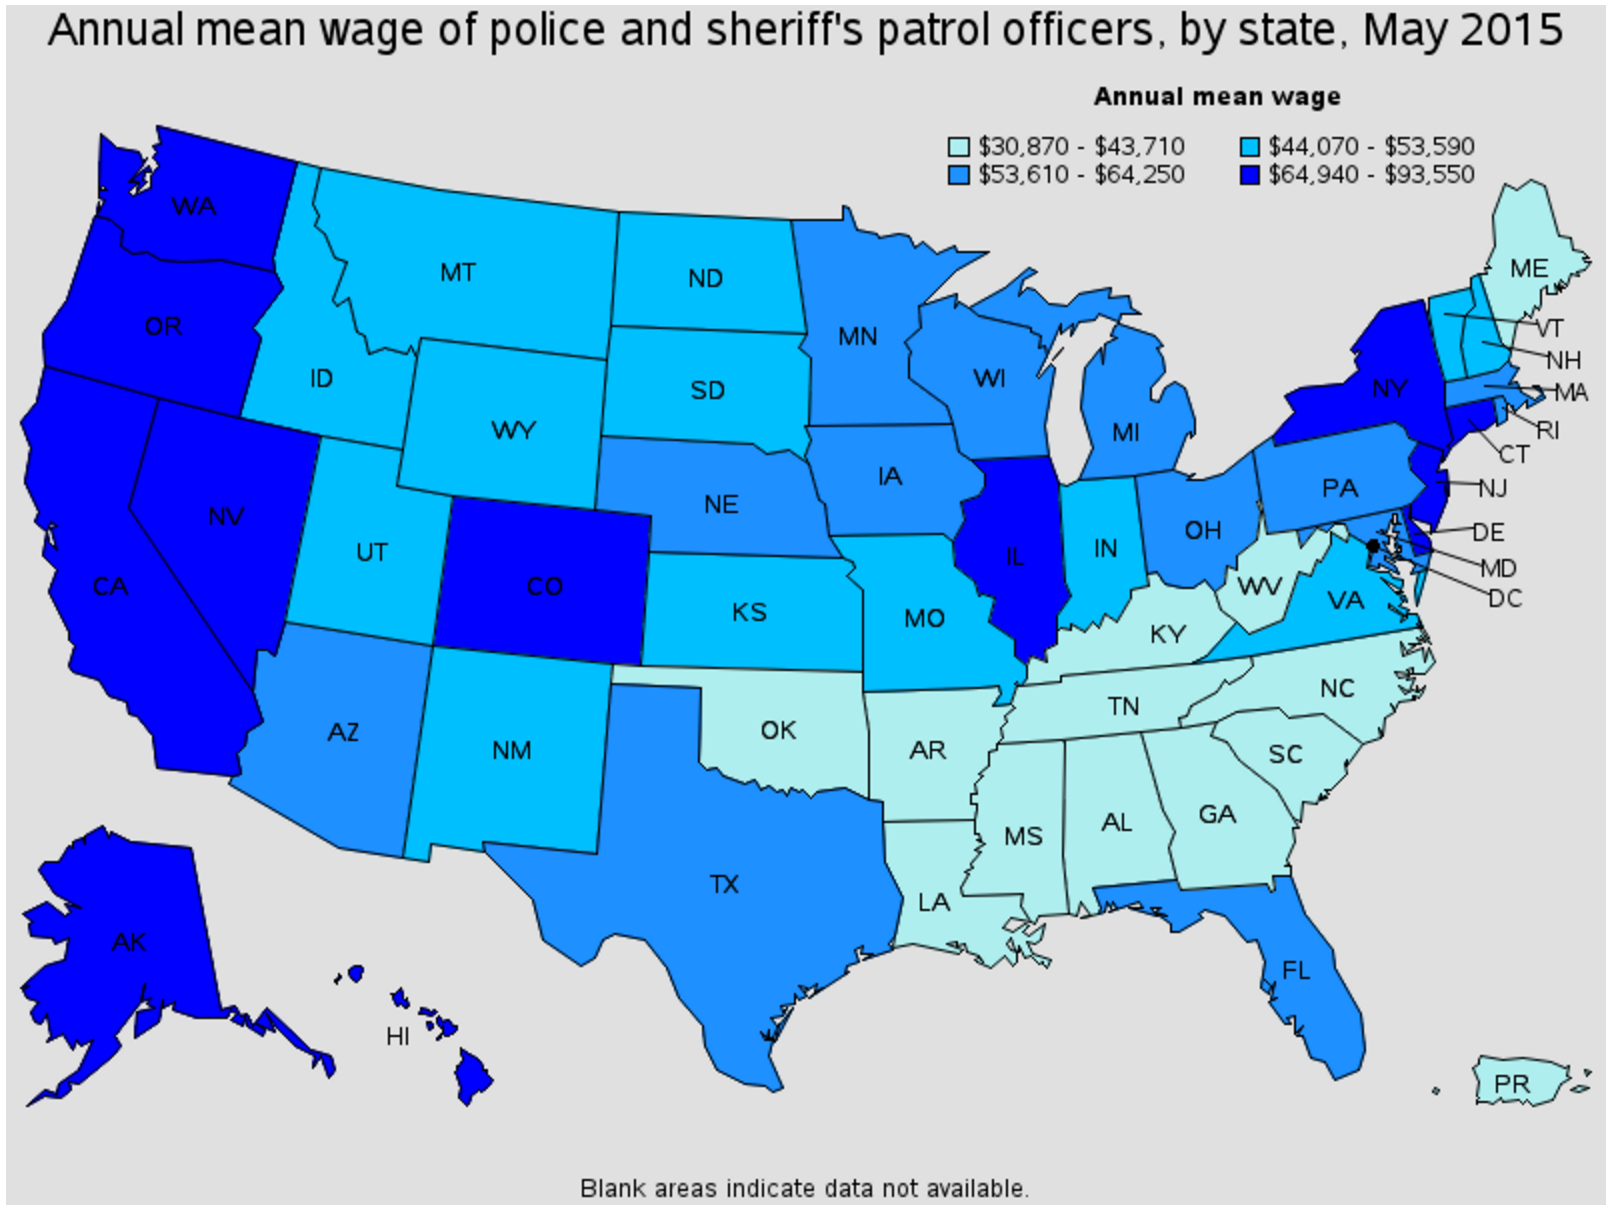 Mesquite police officer average salary by state